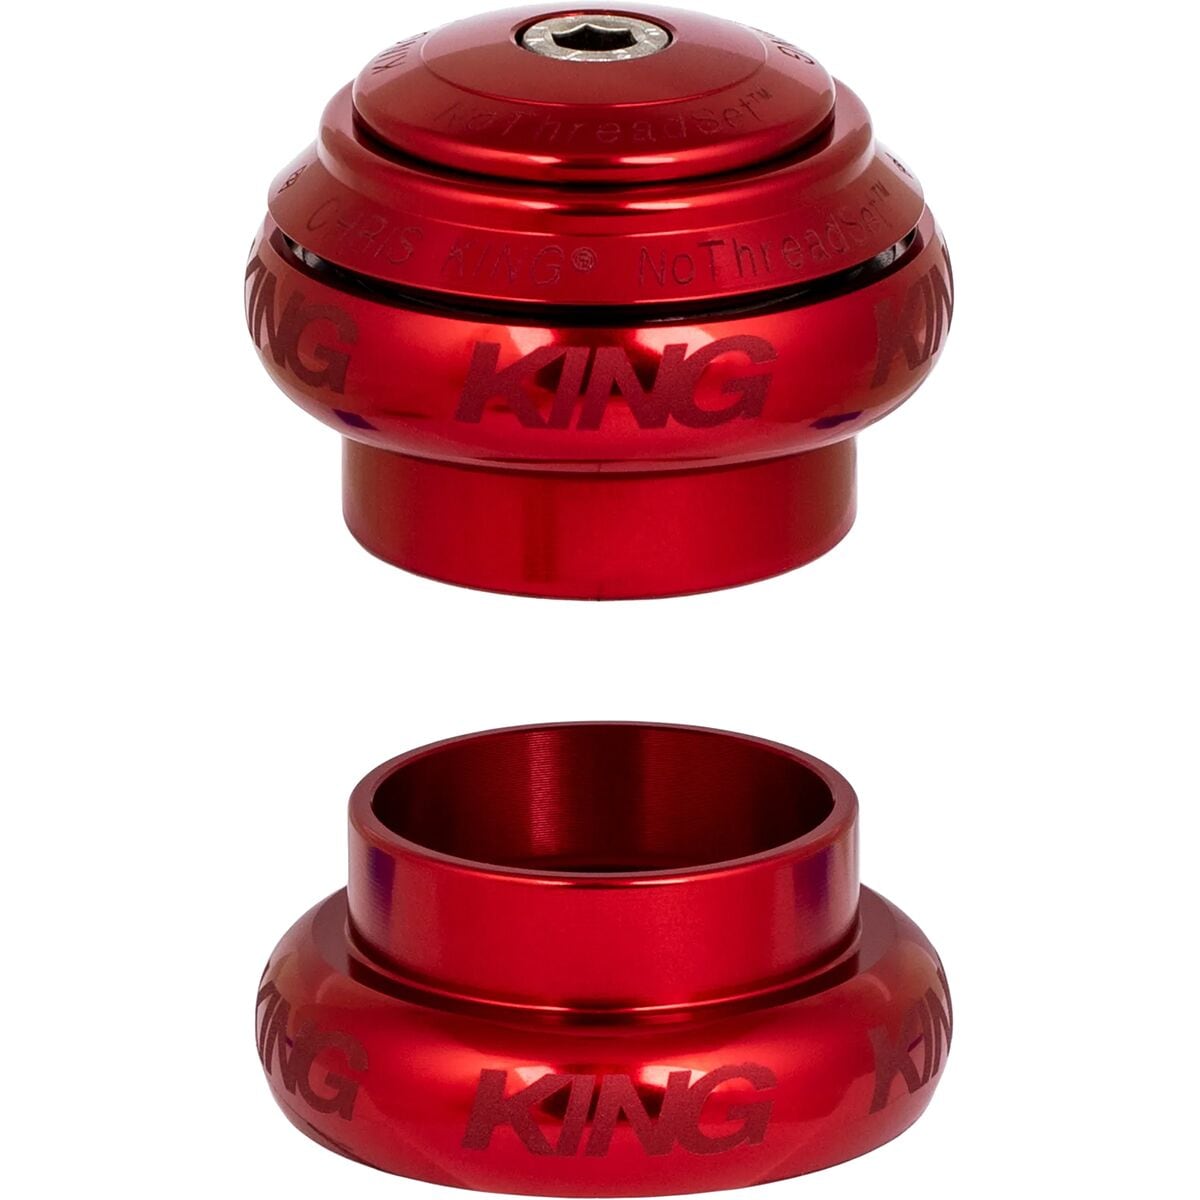 Chris King NoThreadset Headset - 1in Sotto Voce Red, 1in